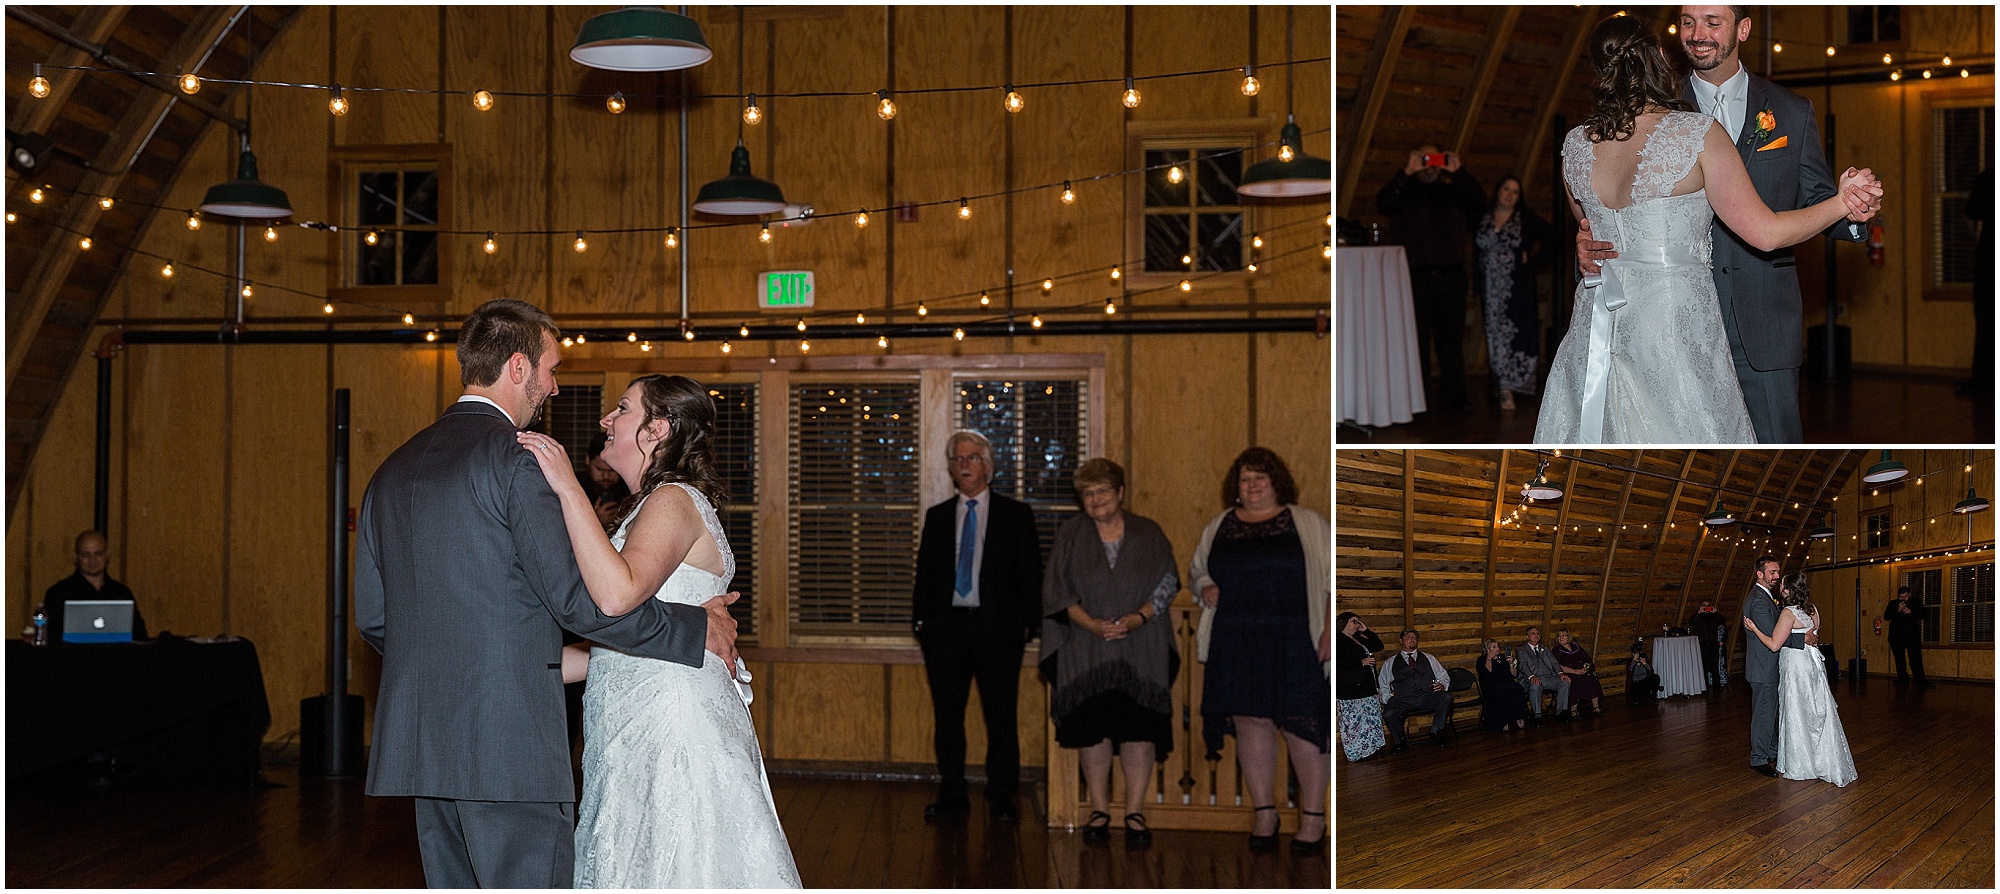 A newly married couple has their first dance upstairs in the gorgeous hardwood interior of Hollinshead Barn in Bend, OR. | Erica Swantek Photography